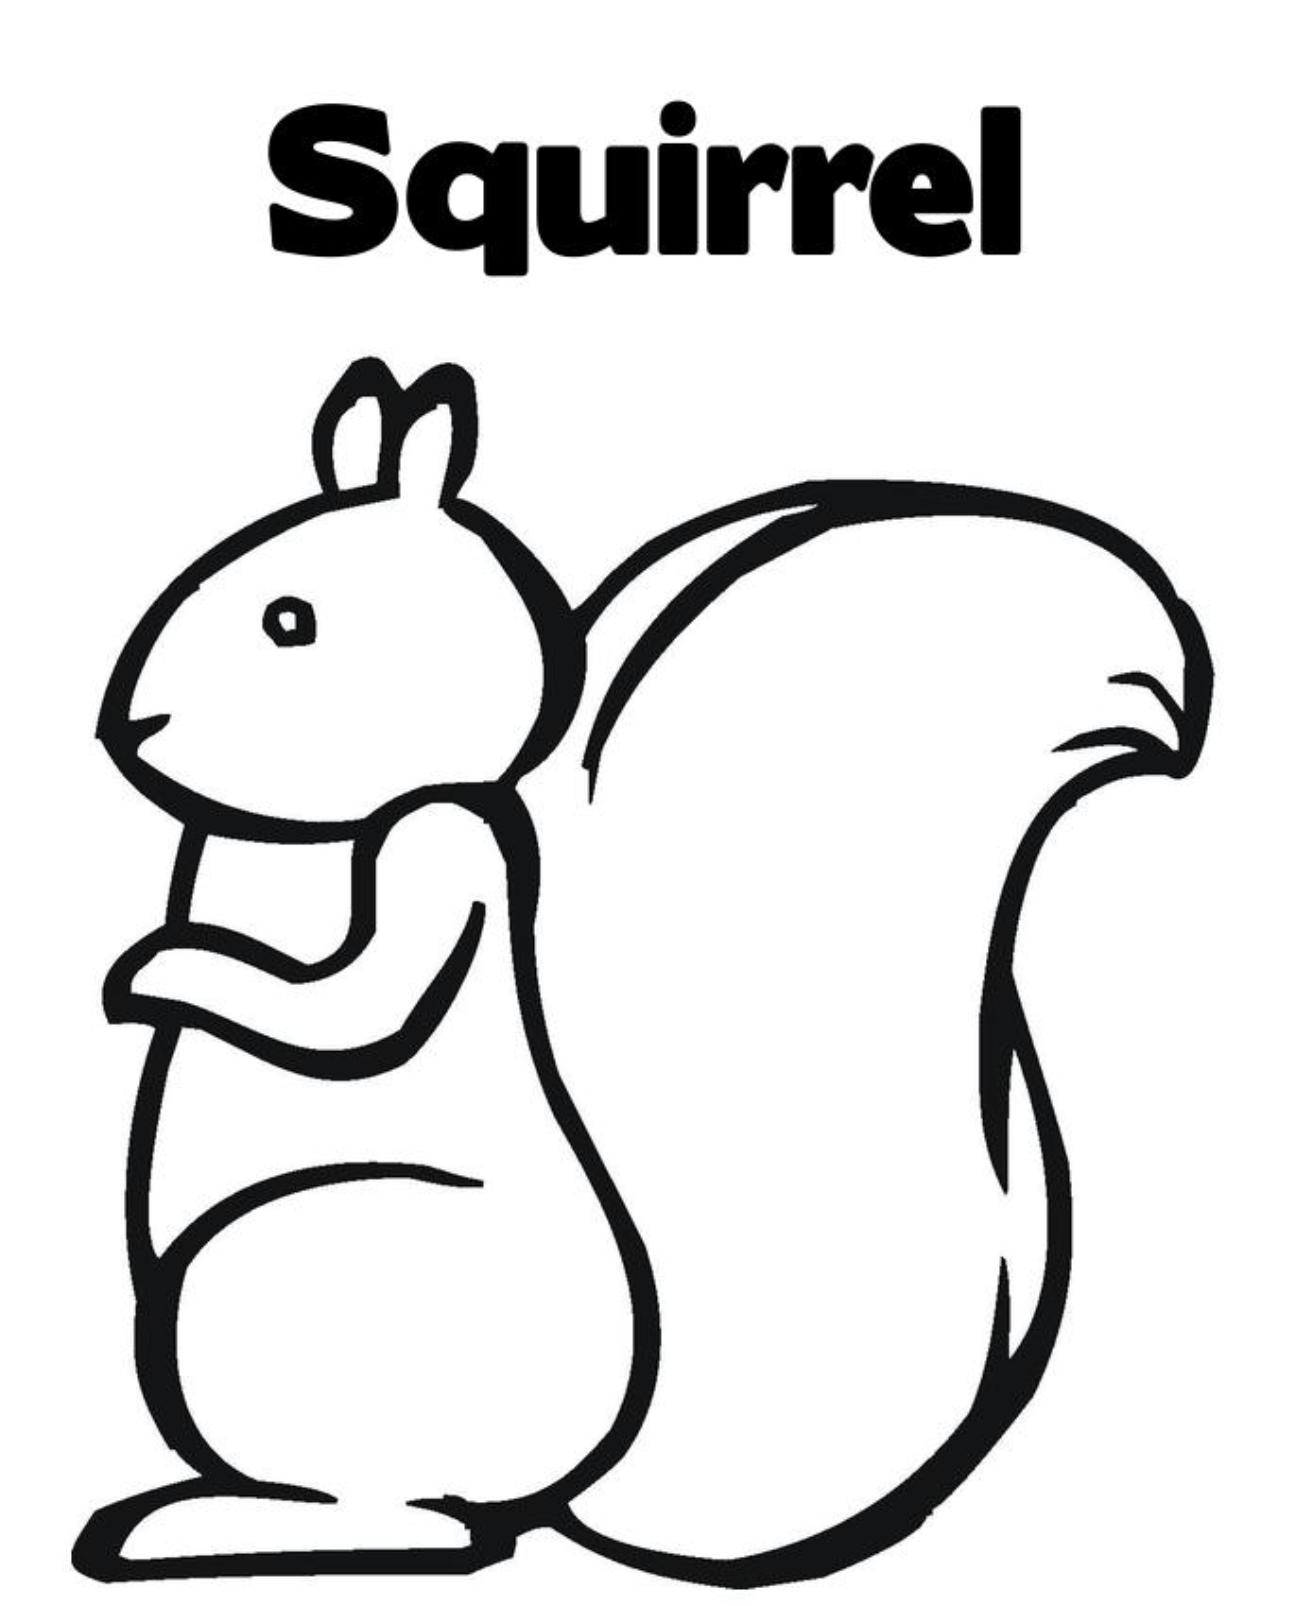 Squirrel coloring pages to download and print for free